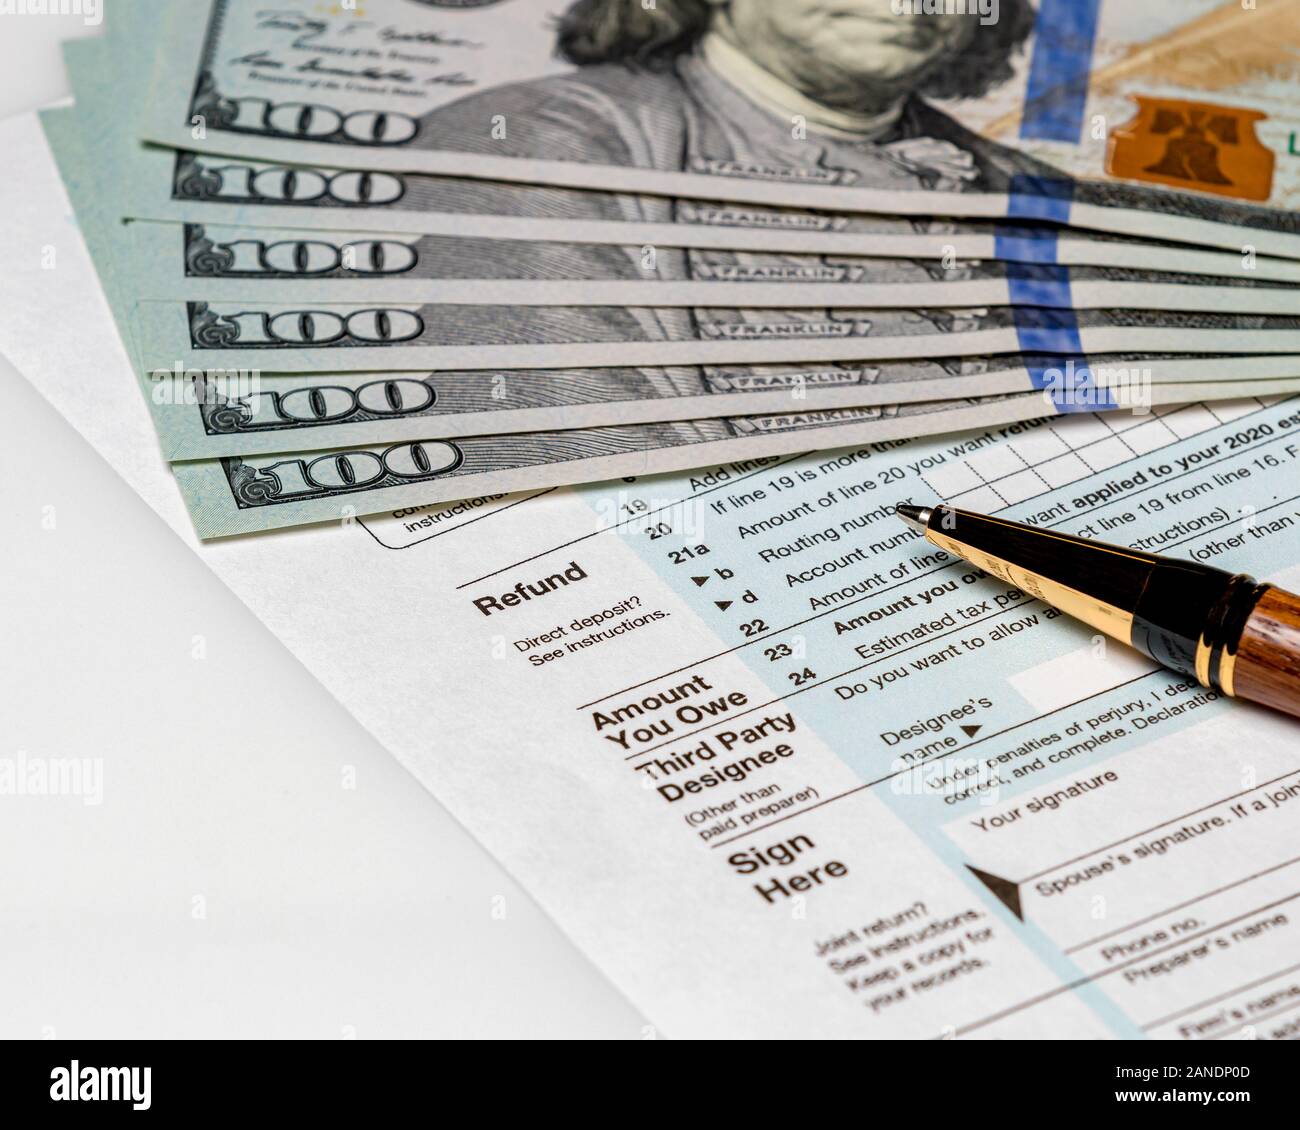 1040 individual income tax return form 2019 with pen and 100 dollar bills. Concept of filing taxes, payment, refund, and April 15,2020 deadline date. Stock Photo